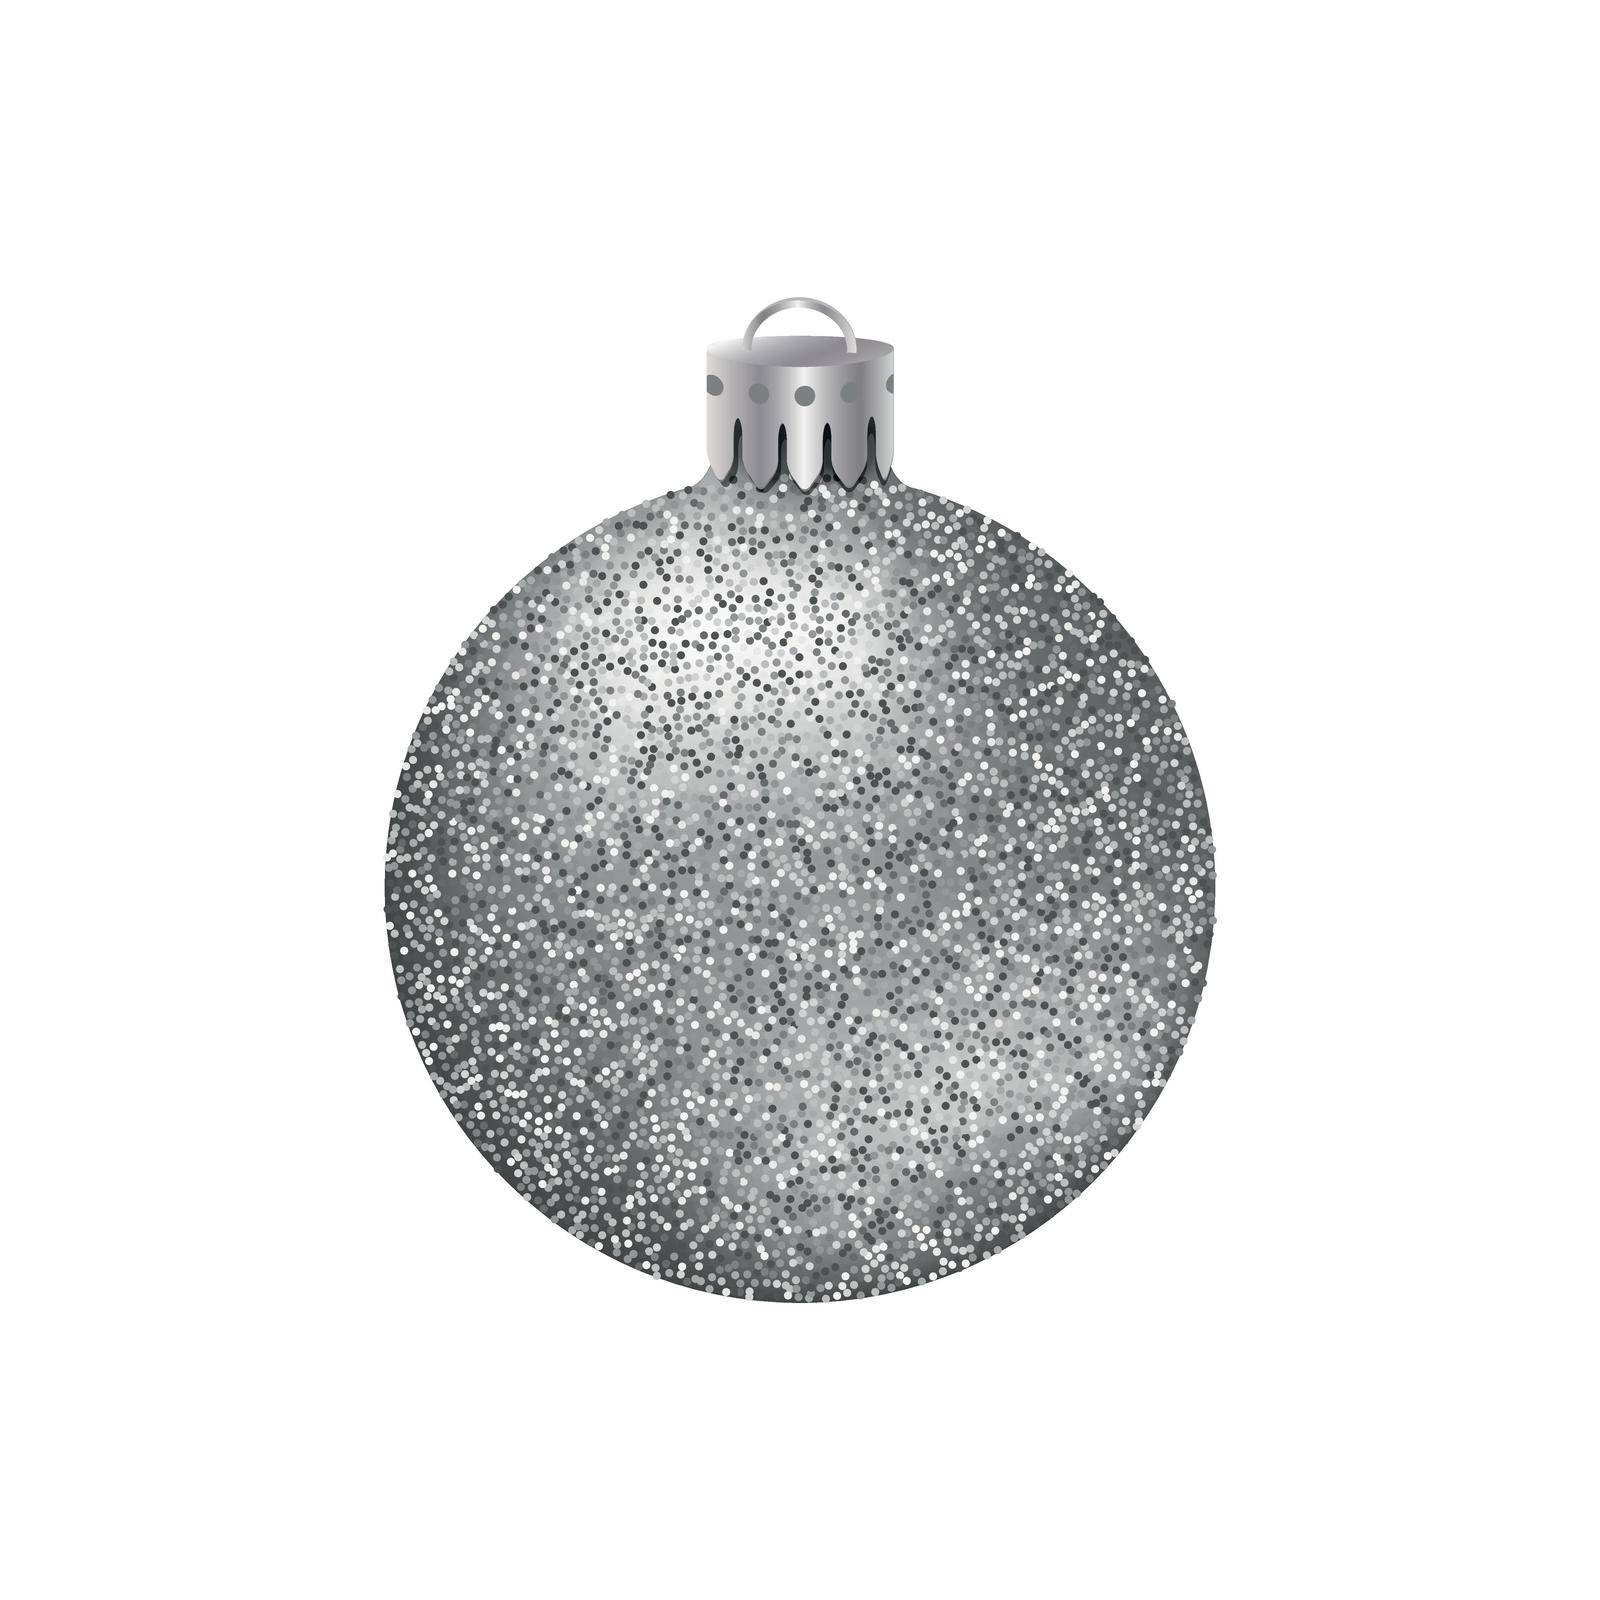 Realistic silver Christmas ball or bauble with glitter texture isolated on white background.